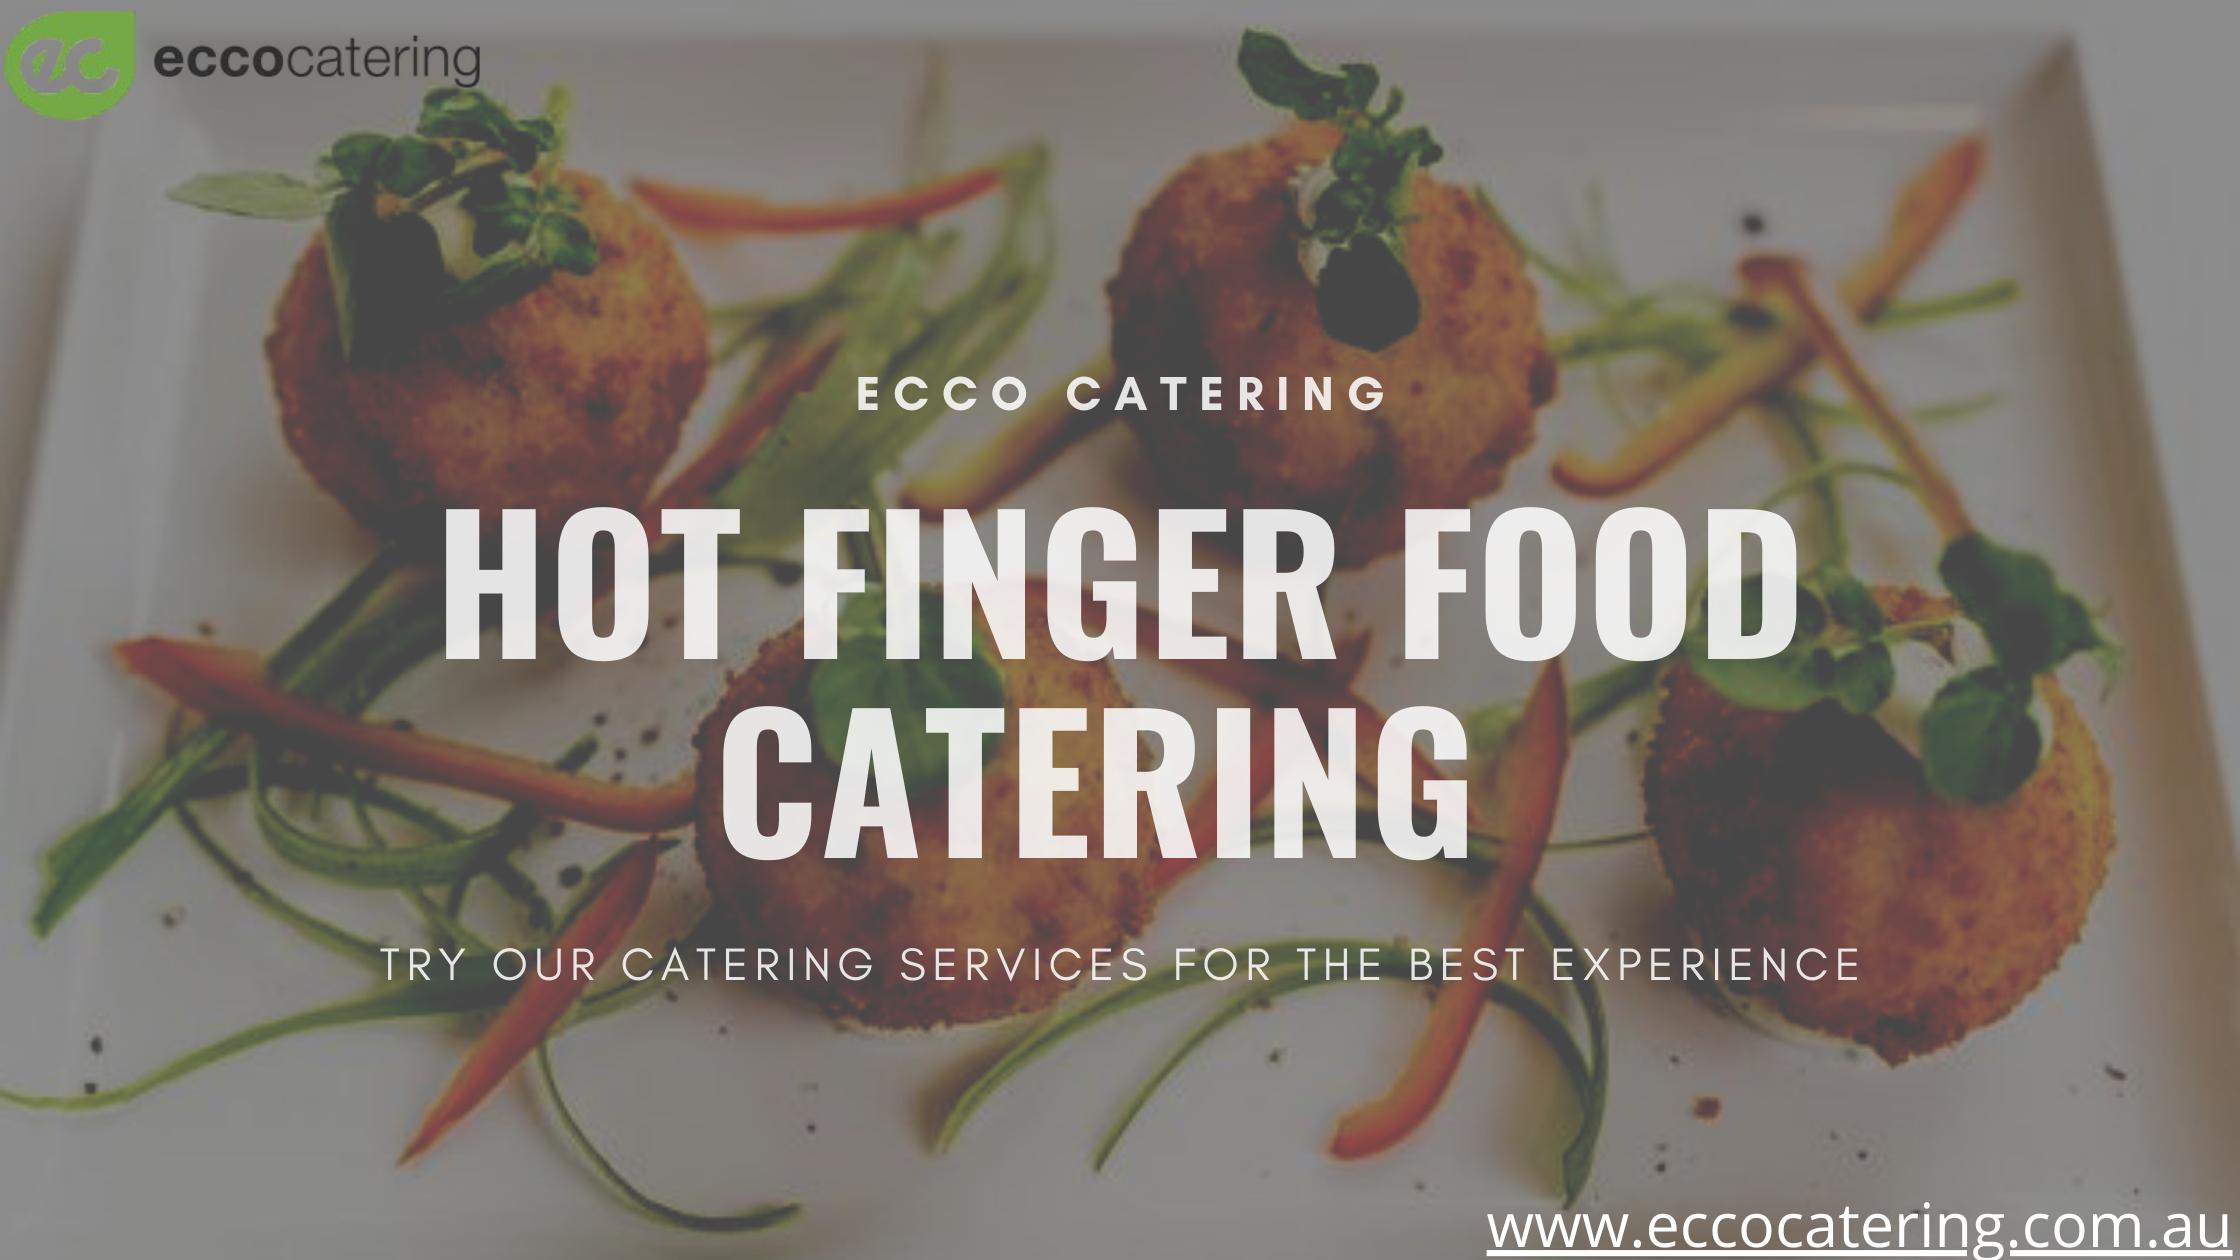 Ecco Catering | cafe | 8 Nicholson Street, East Melbourne, VIC 3002, Australia | 0396638700 OR +61 3 9663 8700